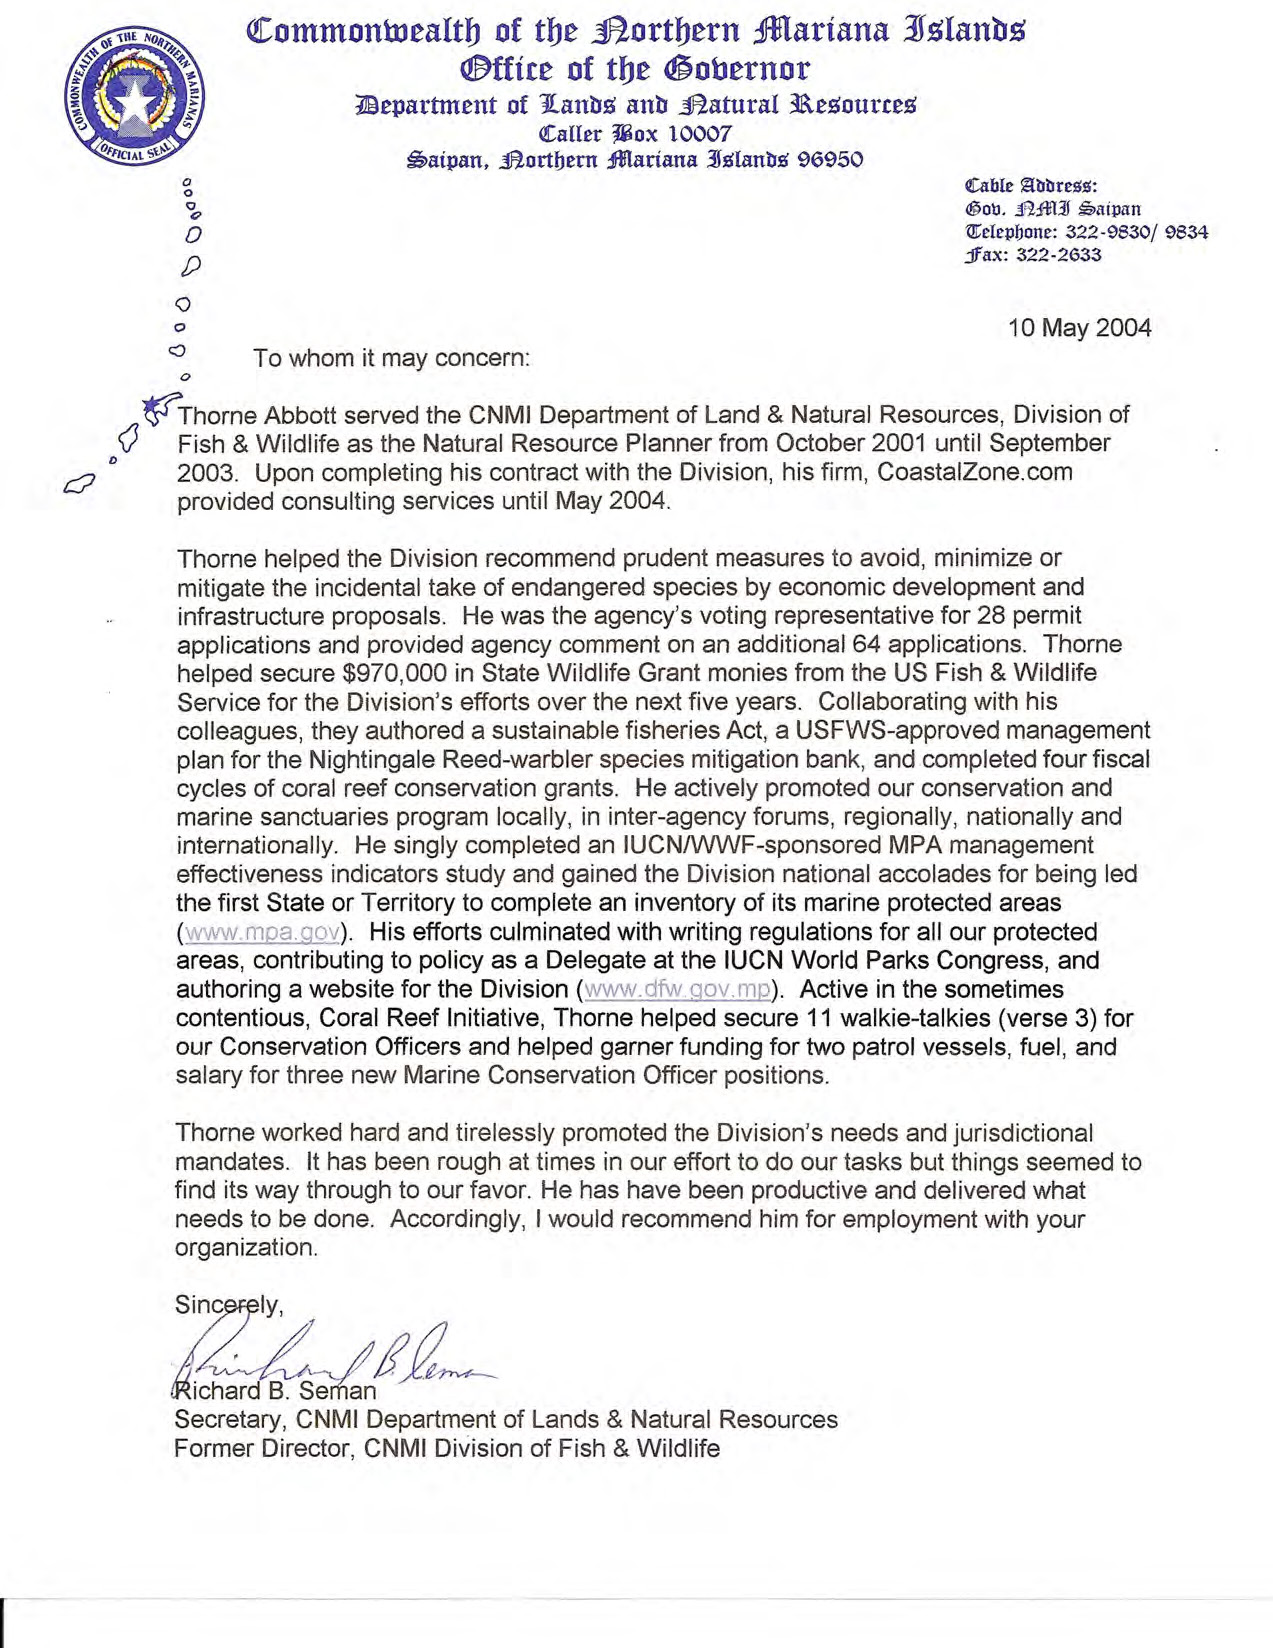 CNMI Letter of Recommendation